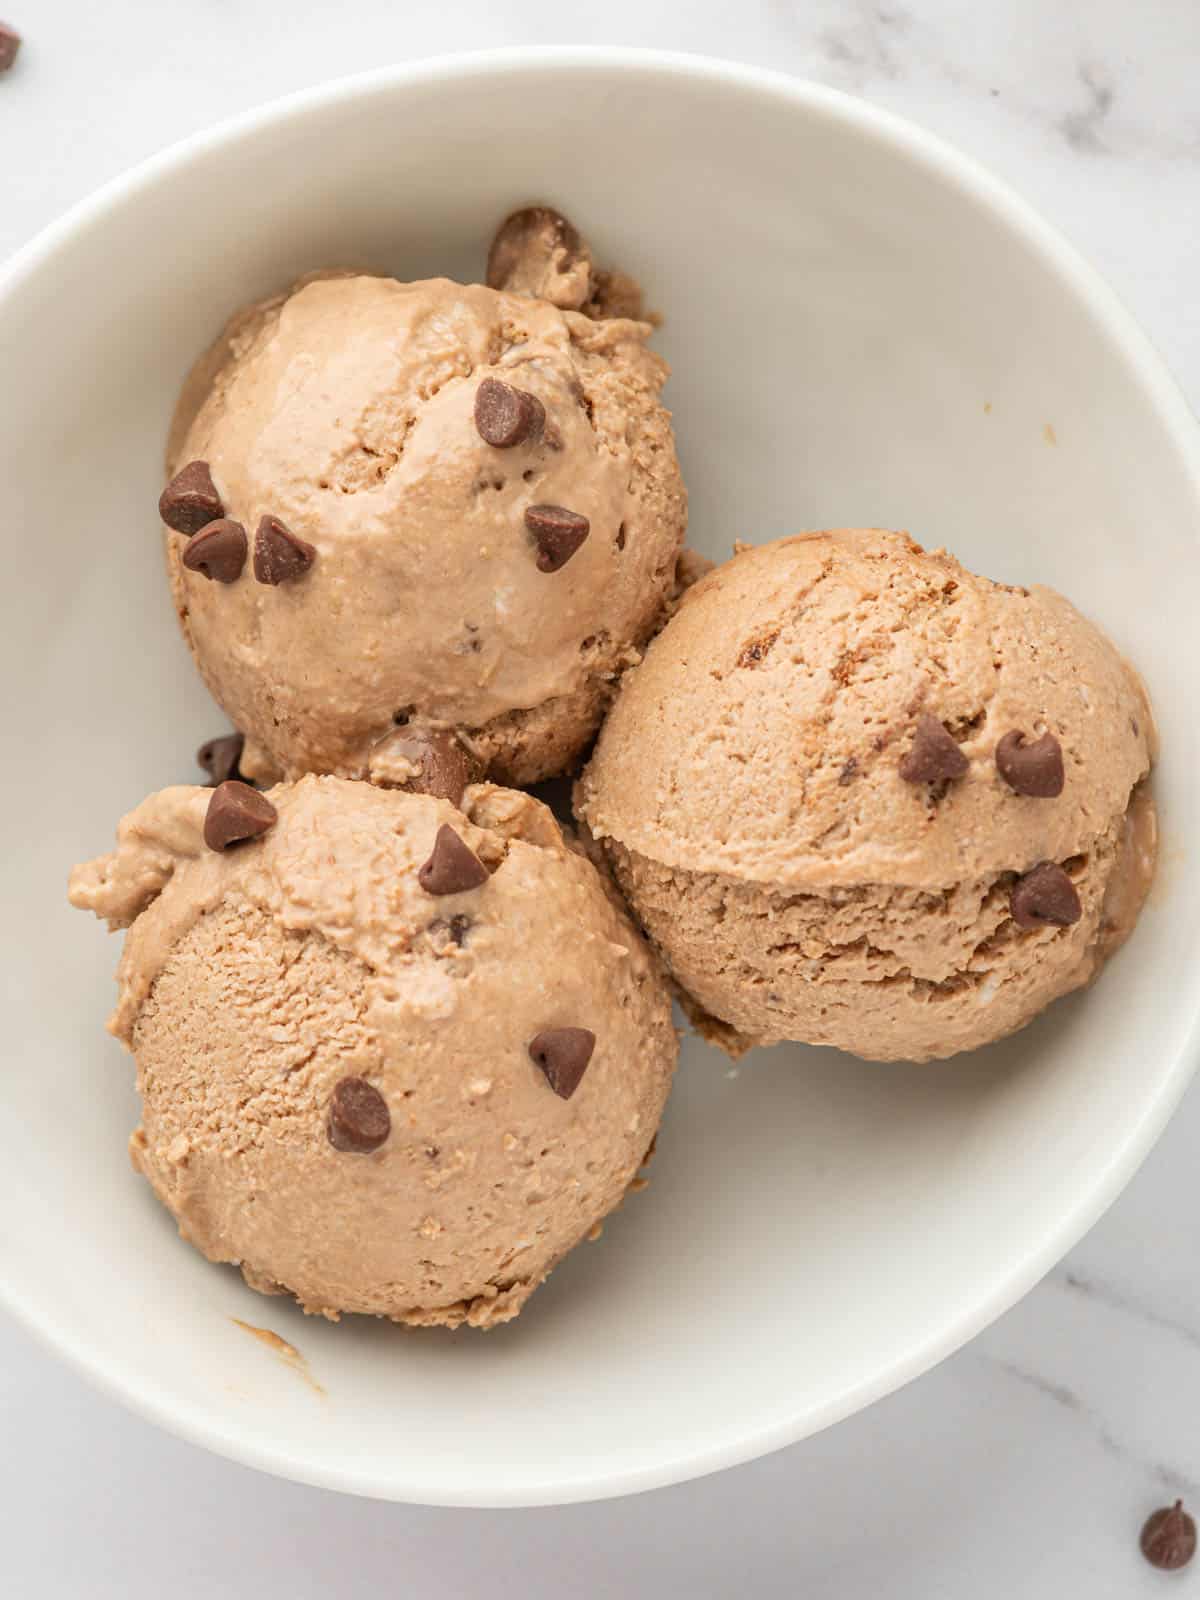 Scoops of chocolate ice cream in a bowl.